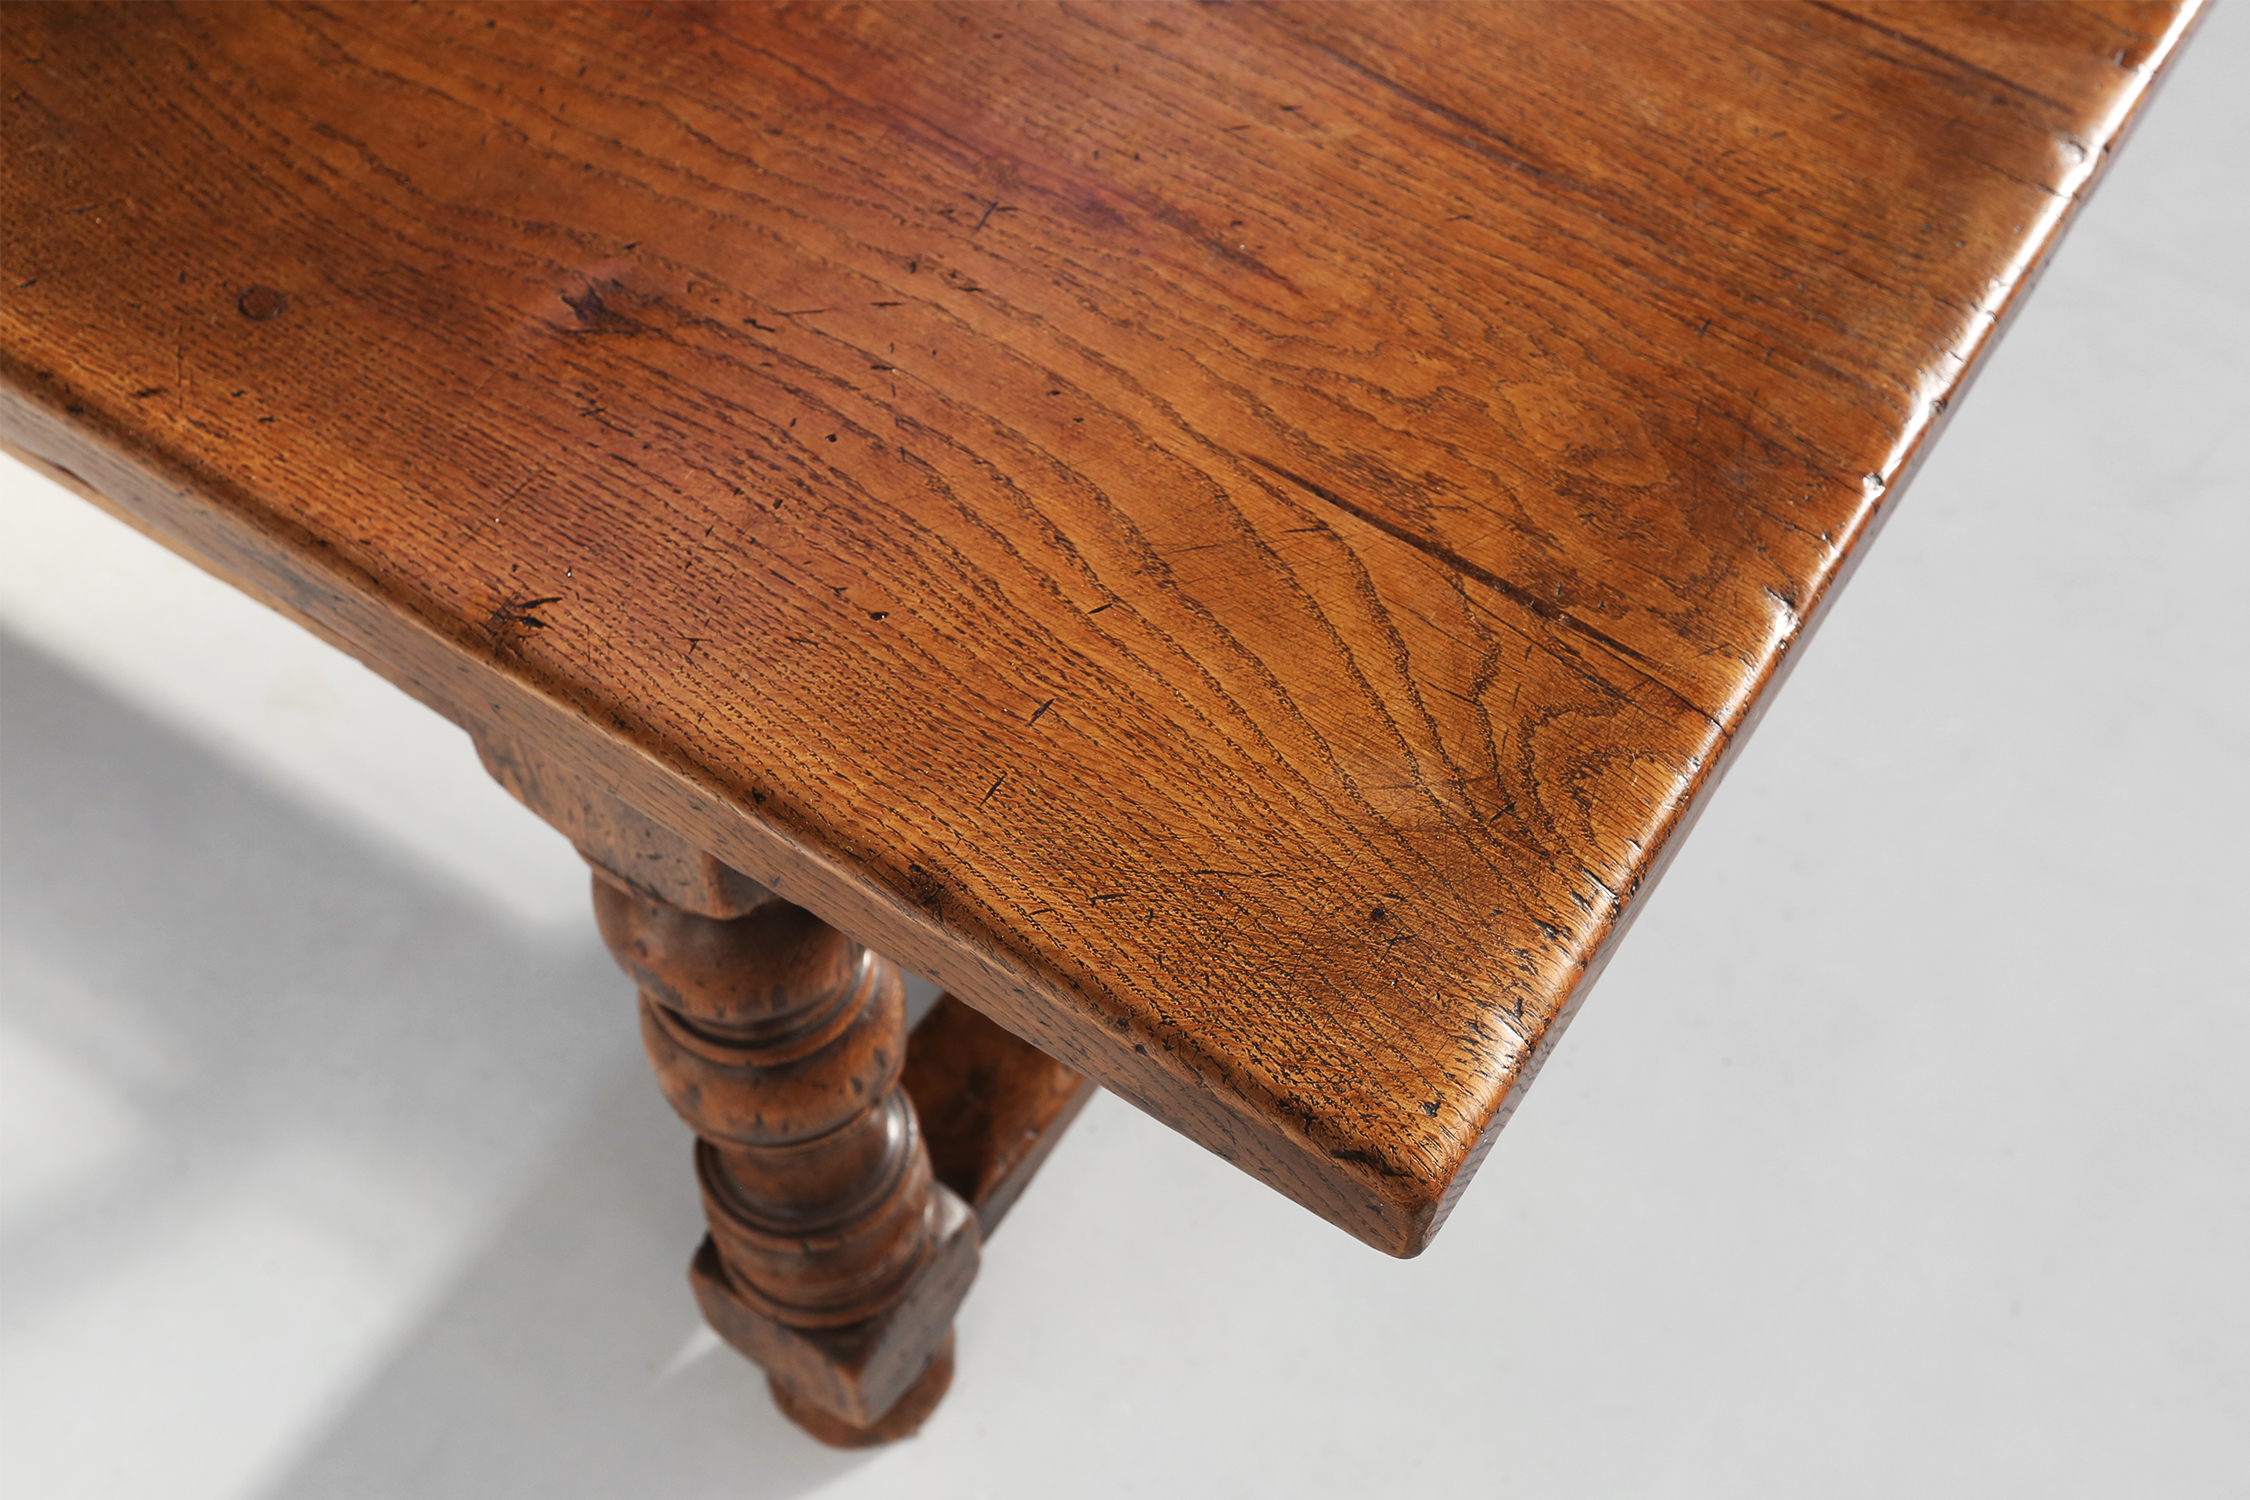 French 18th century oak dining table